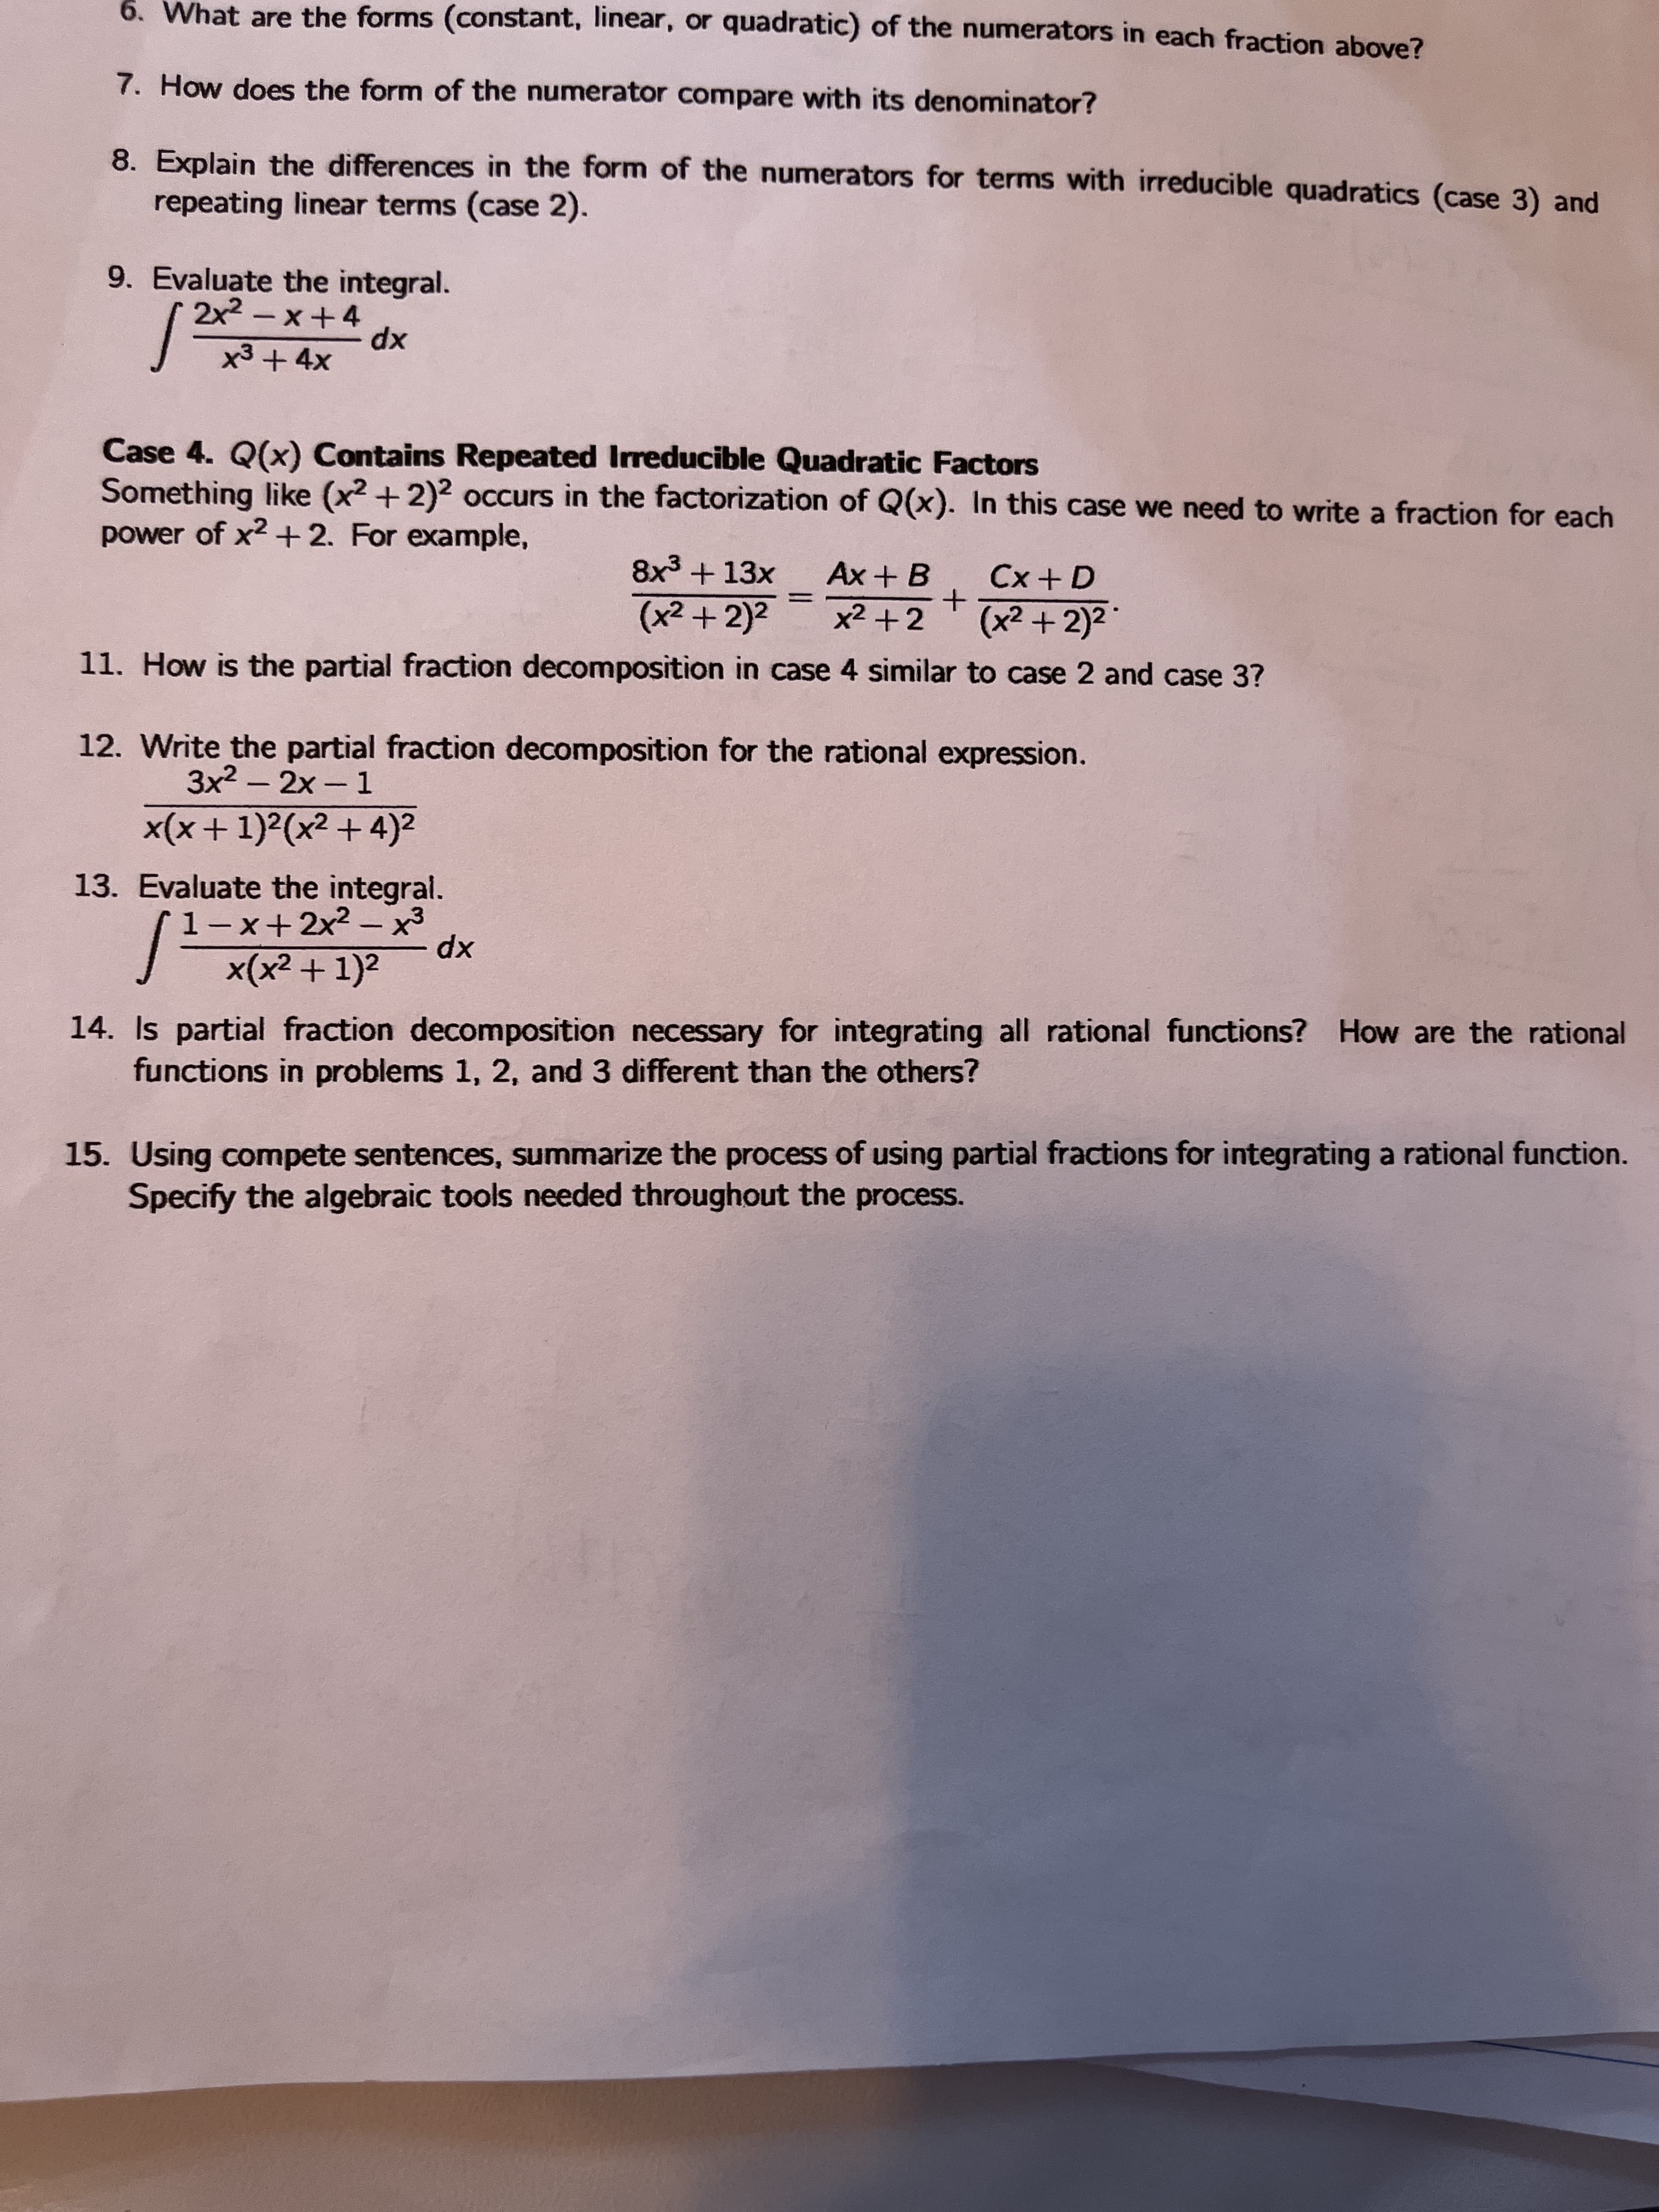 6. What are the forms (constant, linear, or quadratic) of the numerators in each fraction above?
7. How does the form of the numerator compare with its denominator?
8. Explain the differences in the form of the numerators for terms with irreducible quadratics (case 3) and
repeating linear terms (case 2).
9. Evaluate the integral.
2x2-x+4
x3+ 4x
xp
Case 4. Q(x) Contains Repeated Irreducible Quadratic Factors
Something like (x2 +2)2 occurs in the factorization of Q(x). In this case we need to write a fraction for each
power of x2 + 2. For example,
Cx + D
(x² + 2)²*
8x3 +13x
Ax + B
(x2 + 2)2
%3D
11. How is the partial fraction decomposition in case 4 similar to case 2 and case 3?
12. Write the partial fraction decomposition for the rational expression.
3x2 - 2x-1
|
x(x + 1)²(x² + 4)2
13. Evaluate the integral.
EX-Z+xーI
xp
x(x² + 1)2
14. Is partial fraction decomposition necessary for integrating all rational functions? How are the rational
functions in problems 1, 2, and 3 different than the others?
15. Using compete sentences, summarize the process of using partial fractions for integrating a rational function.
Specify the algebraic tools needed throughout the process.
